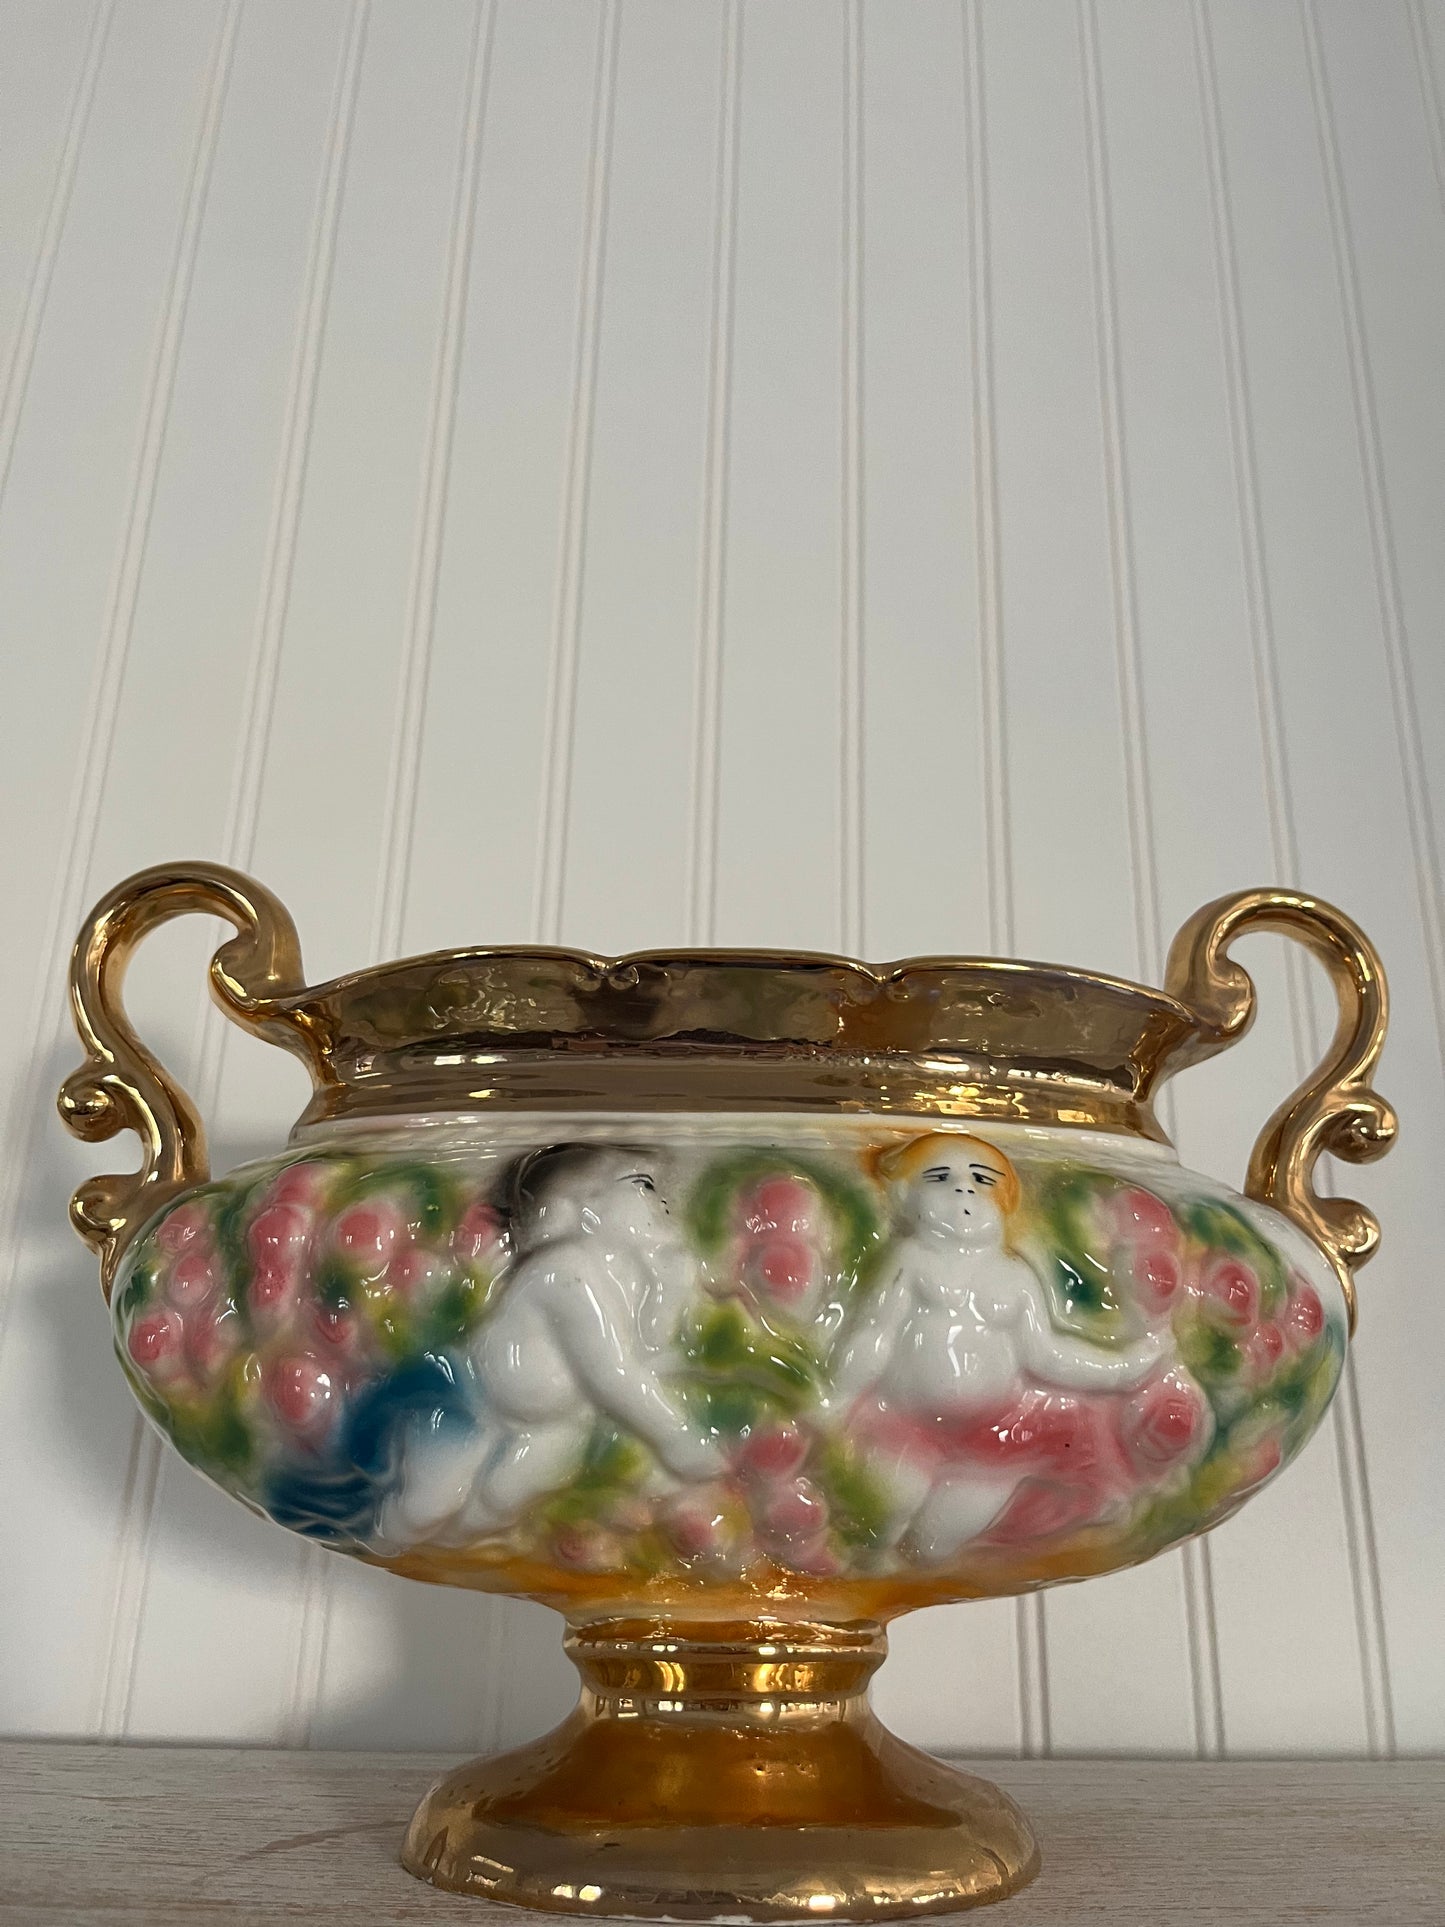 Quirky Neo-Baroque Gold Accented Double Handled Ugly Cherubs Tureen/Urn Pedestal Vase